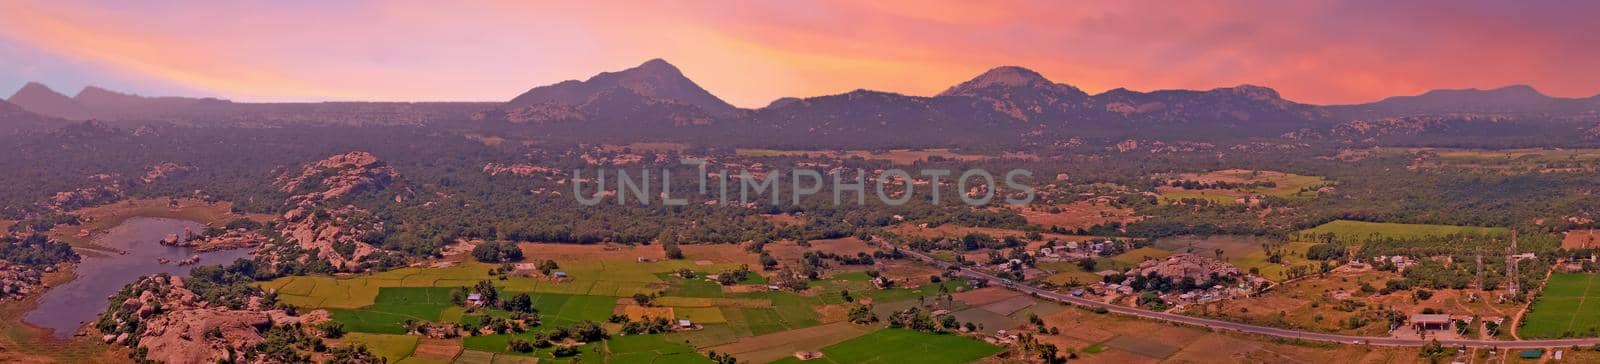 Panoramic view from Gingee Fort, Thiruvannamalai in Tamil Nadu India at sunset,  by devy